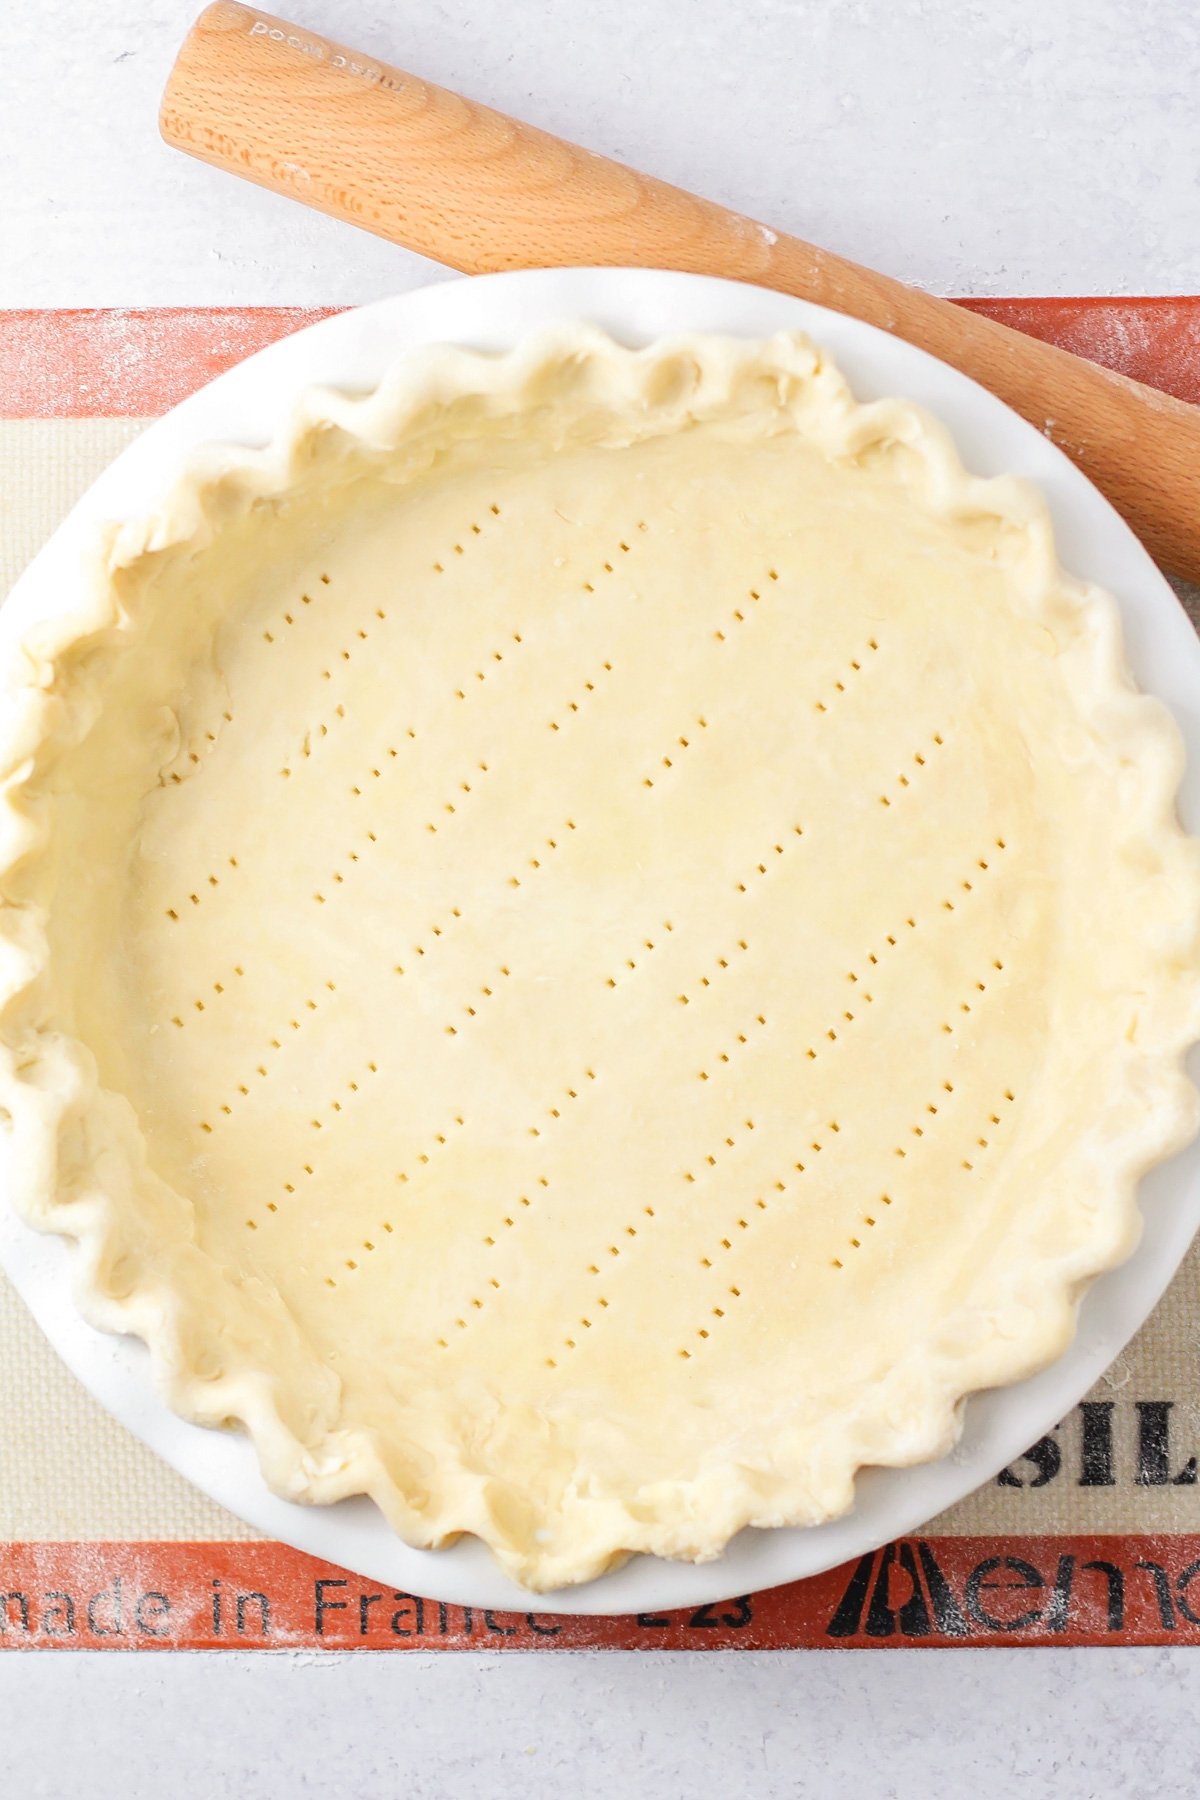 Prepared homemade pie crust in a baking dish ready for filling.